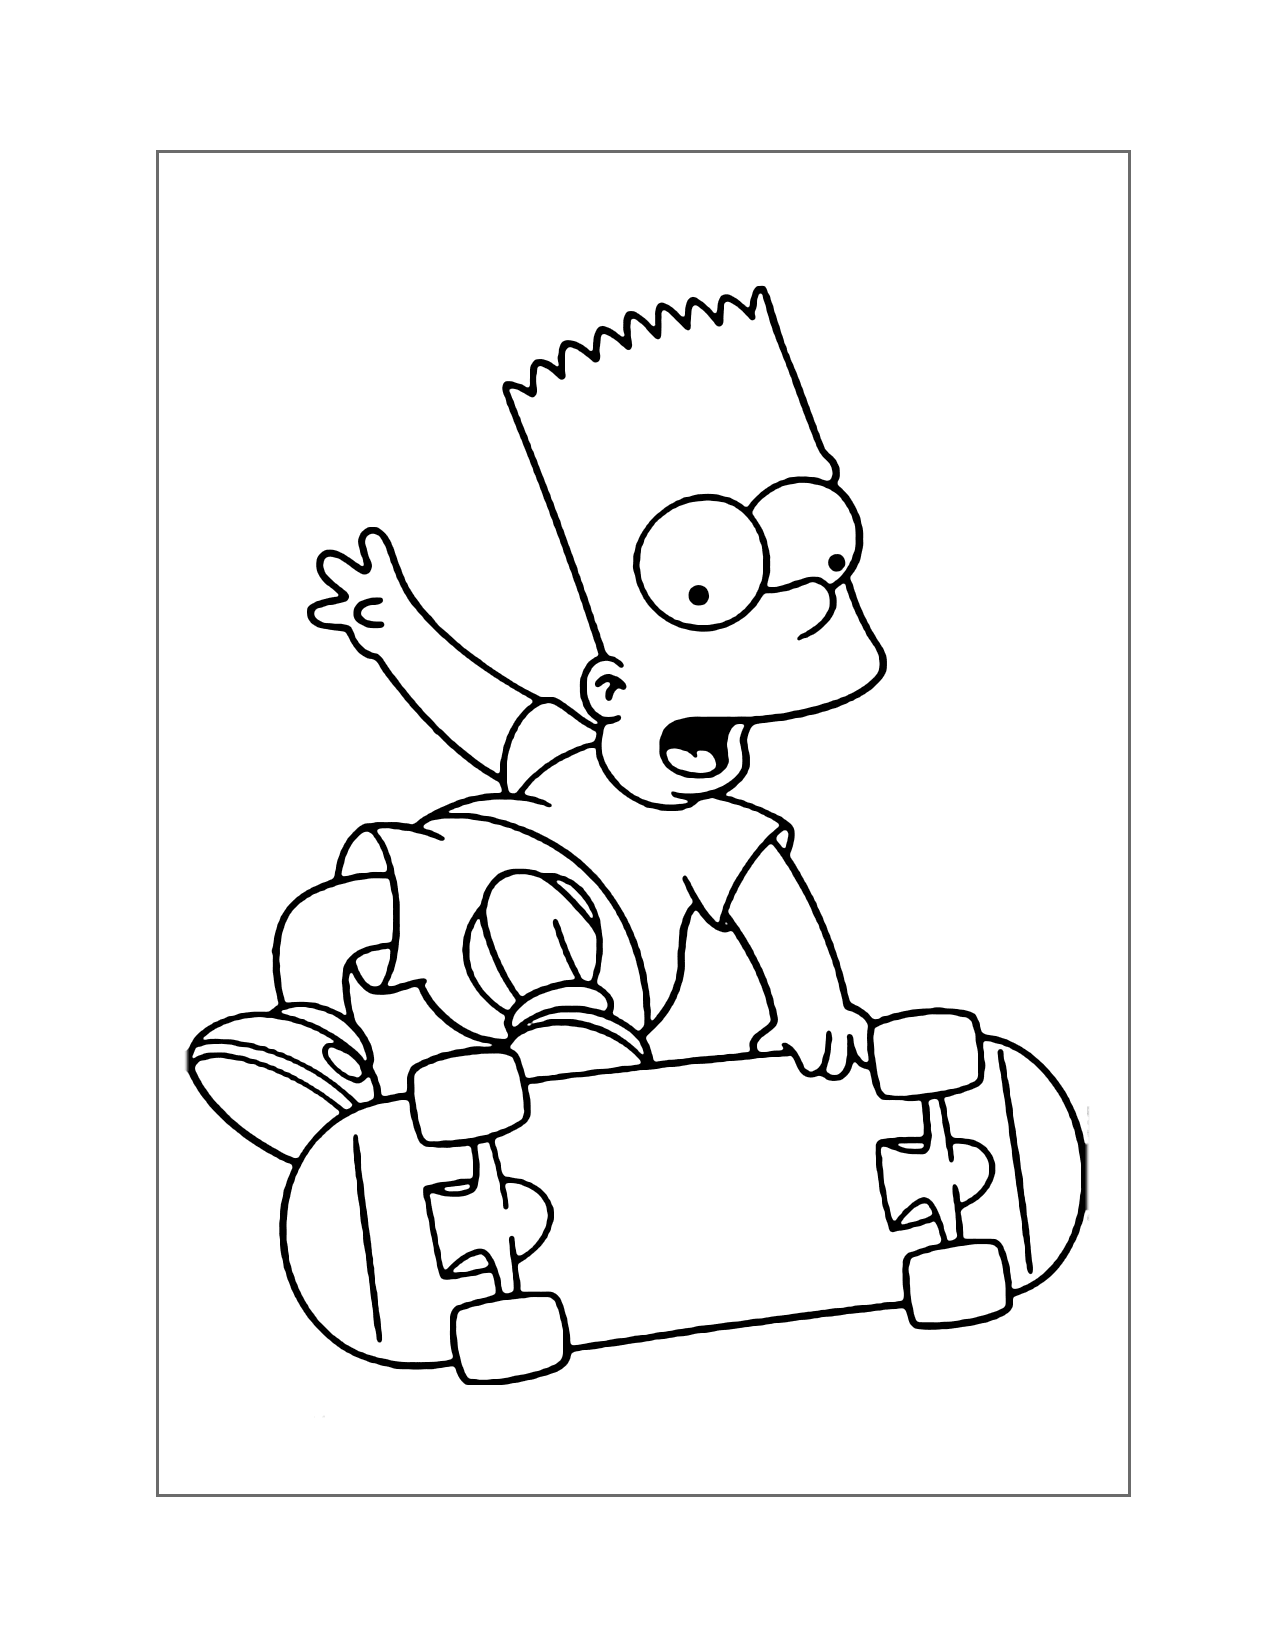 Bart Simpson Rides A Skateboard Coloring Page